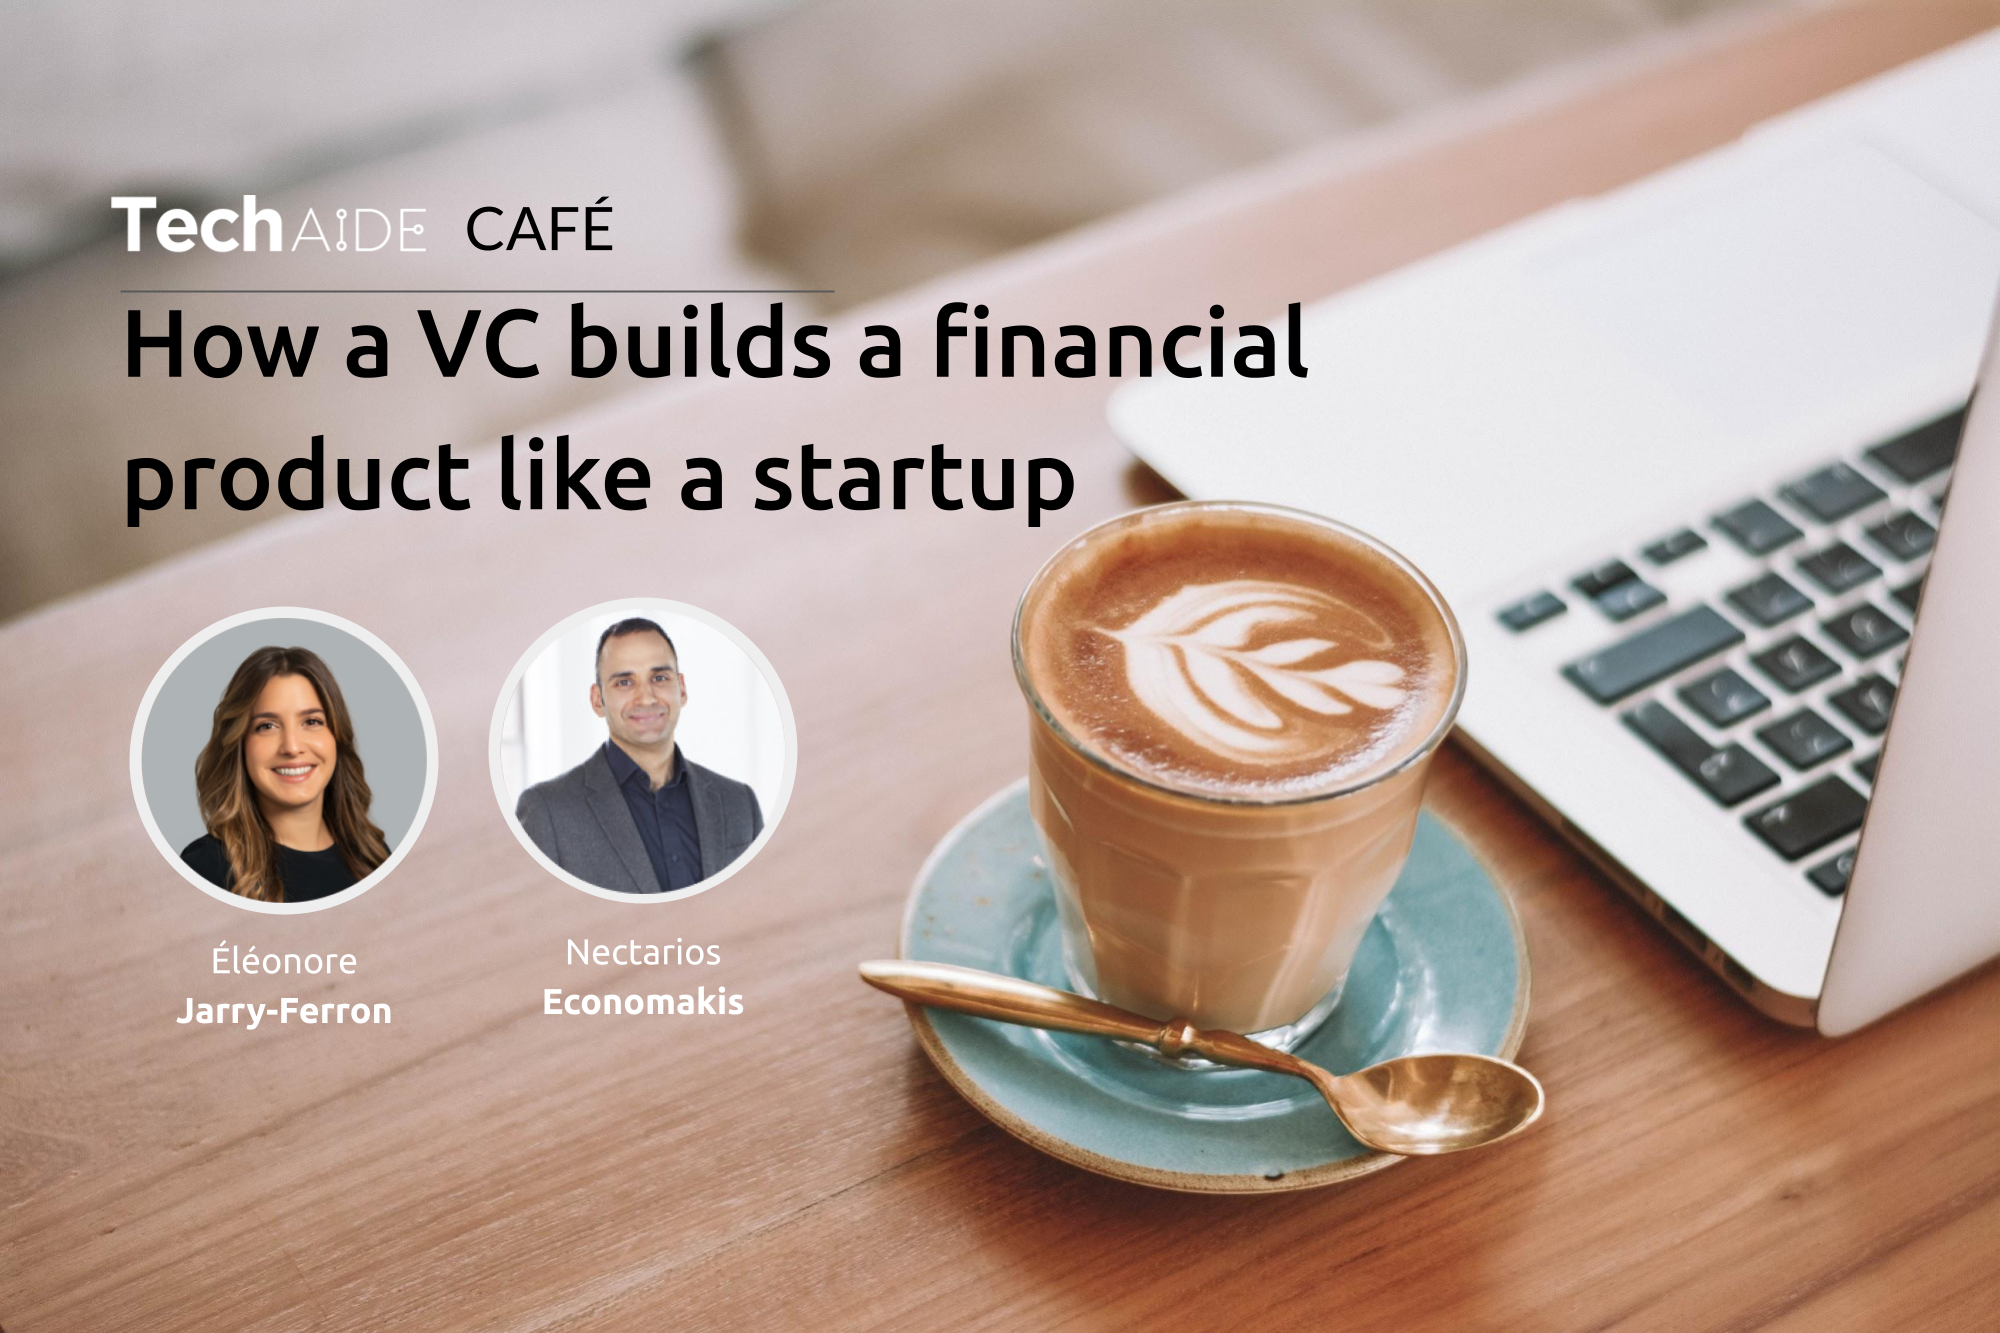 TechAide Café with Eleonore Jarry from Brigthspark on how a VC builds a financial product like a startup